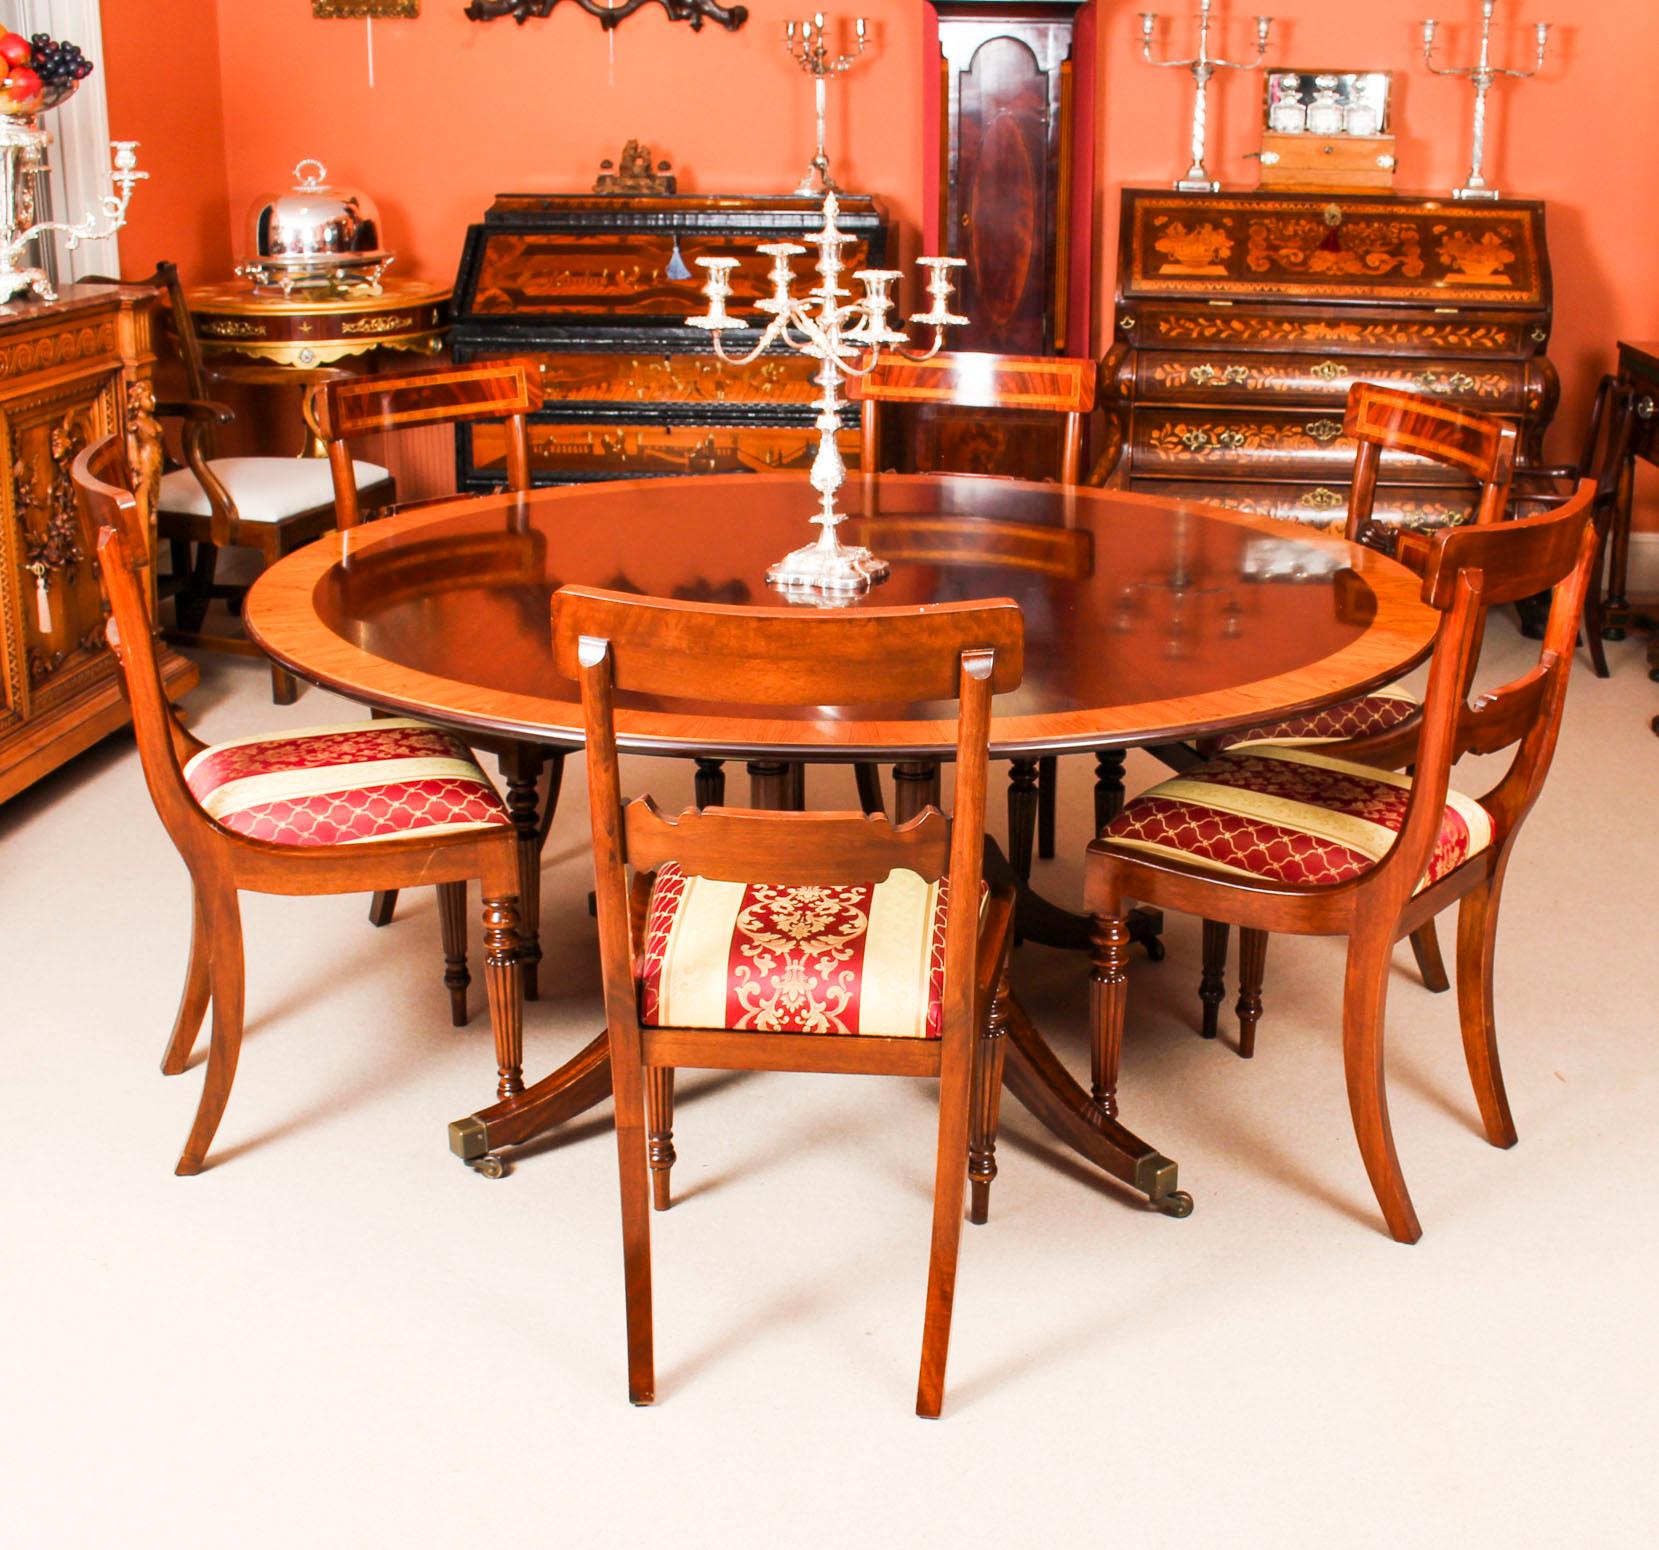 This beautiful dining set comprising a Regency style flame mahogany dining table made by the Master Cabinet maker Master Cabinet makers Millwood, of Wittersham Kent, and bears their brass label on the underside, circa 1970 in date, with a set of six